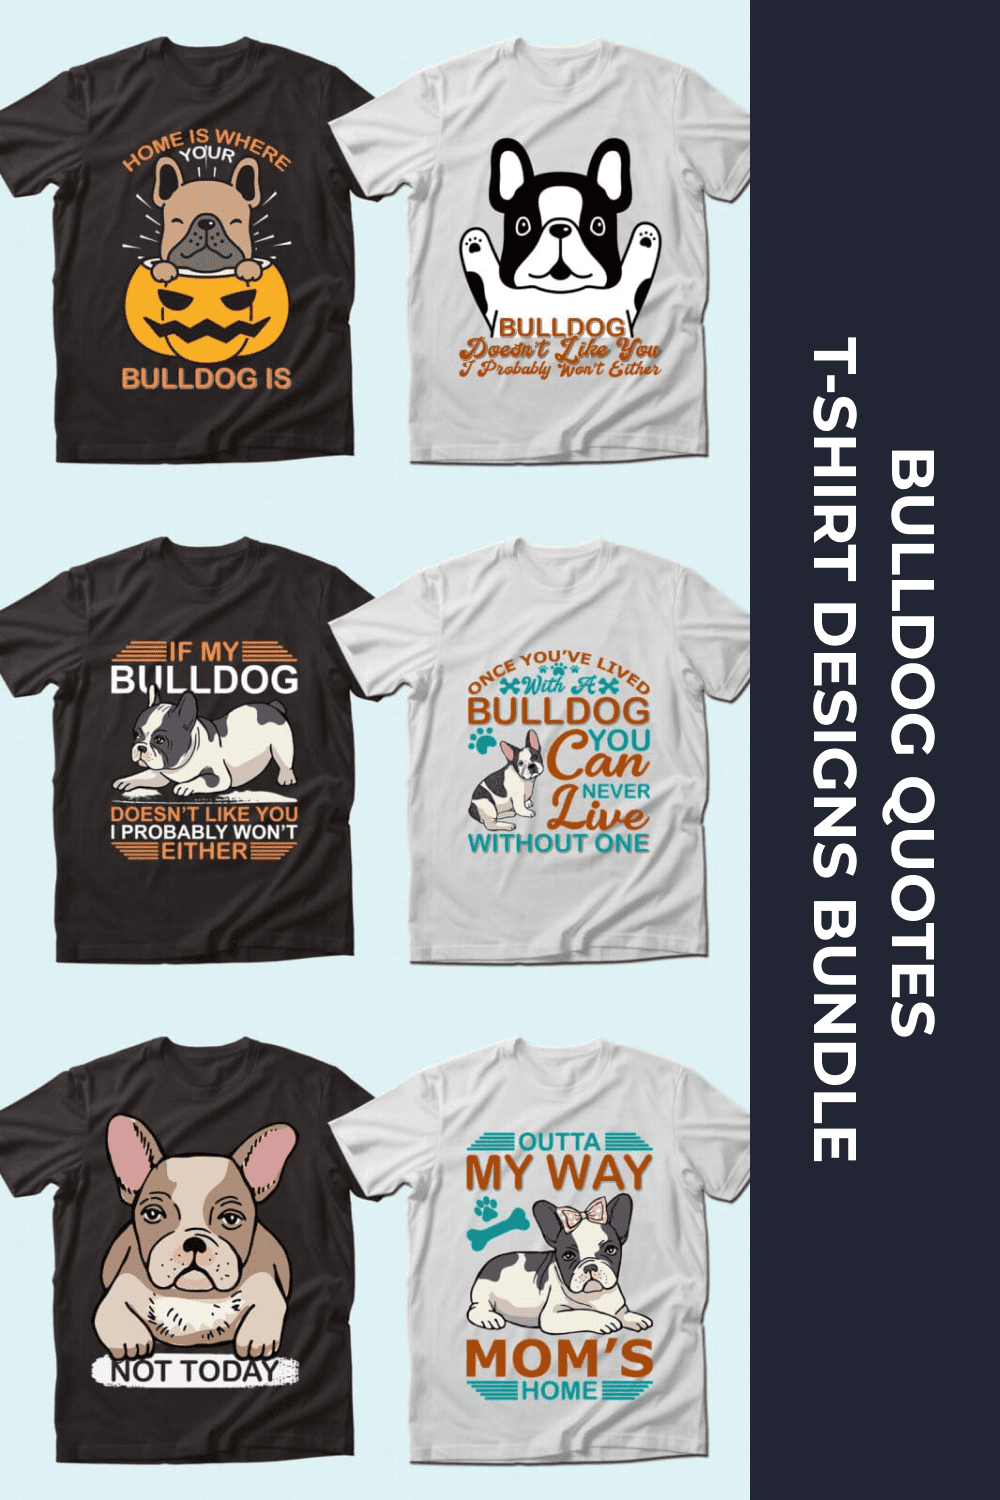 Funny quotes PNG Designs for T Shirt & Merch